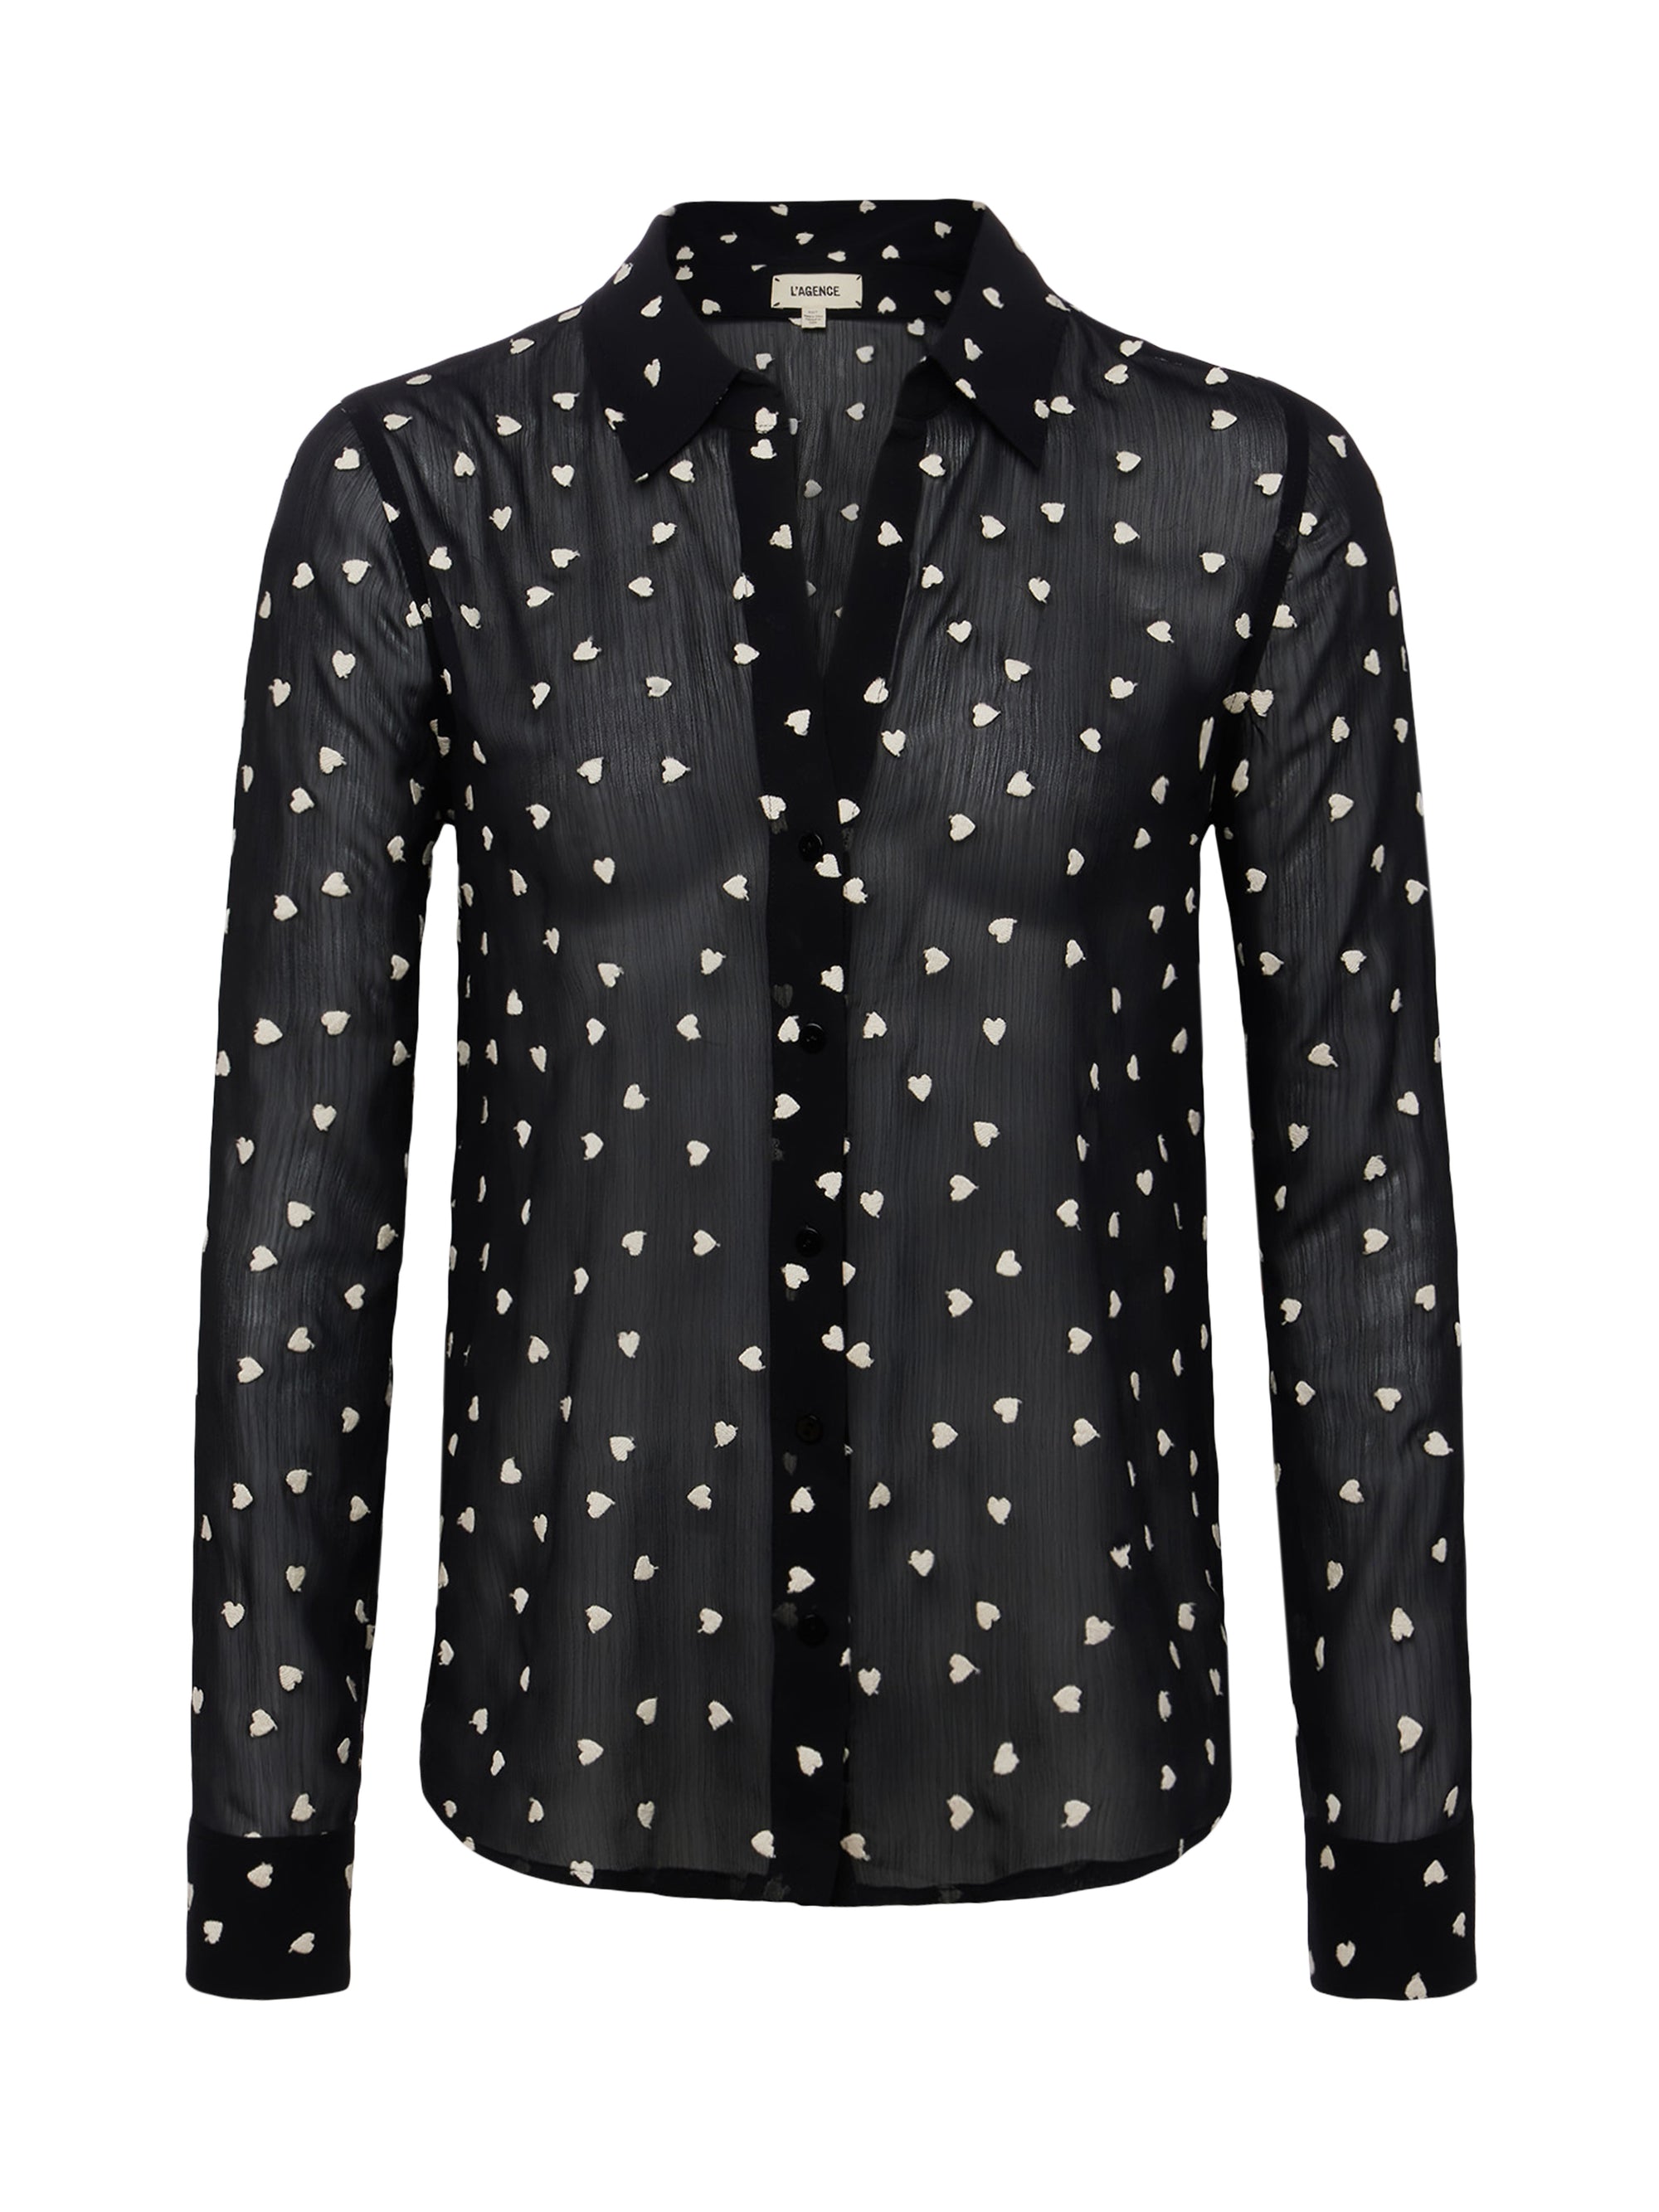 Laurent Blouse with Heart Embroidery in Black/Ivory by L'AGENCE